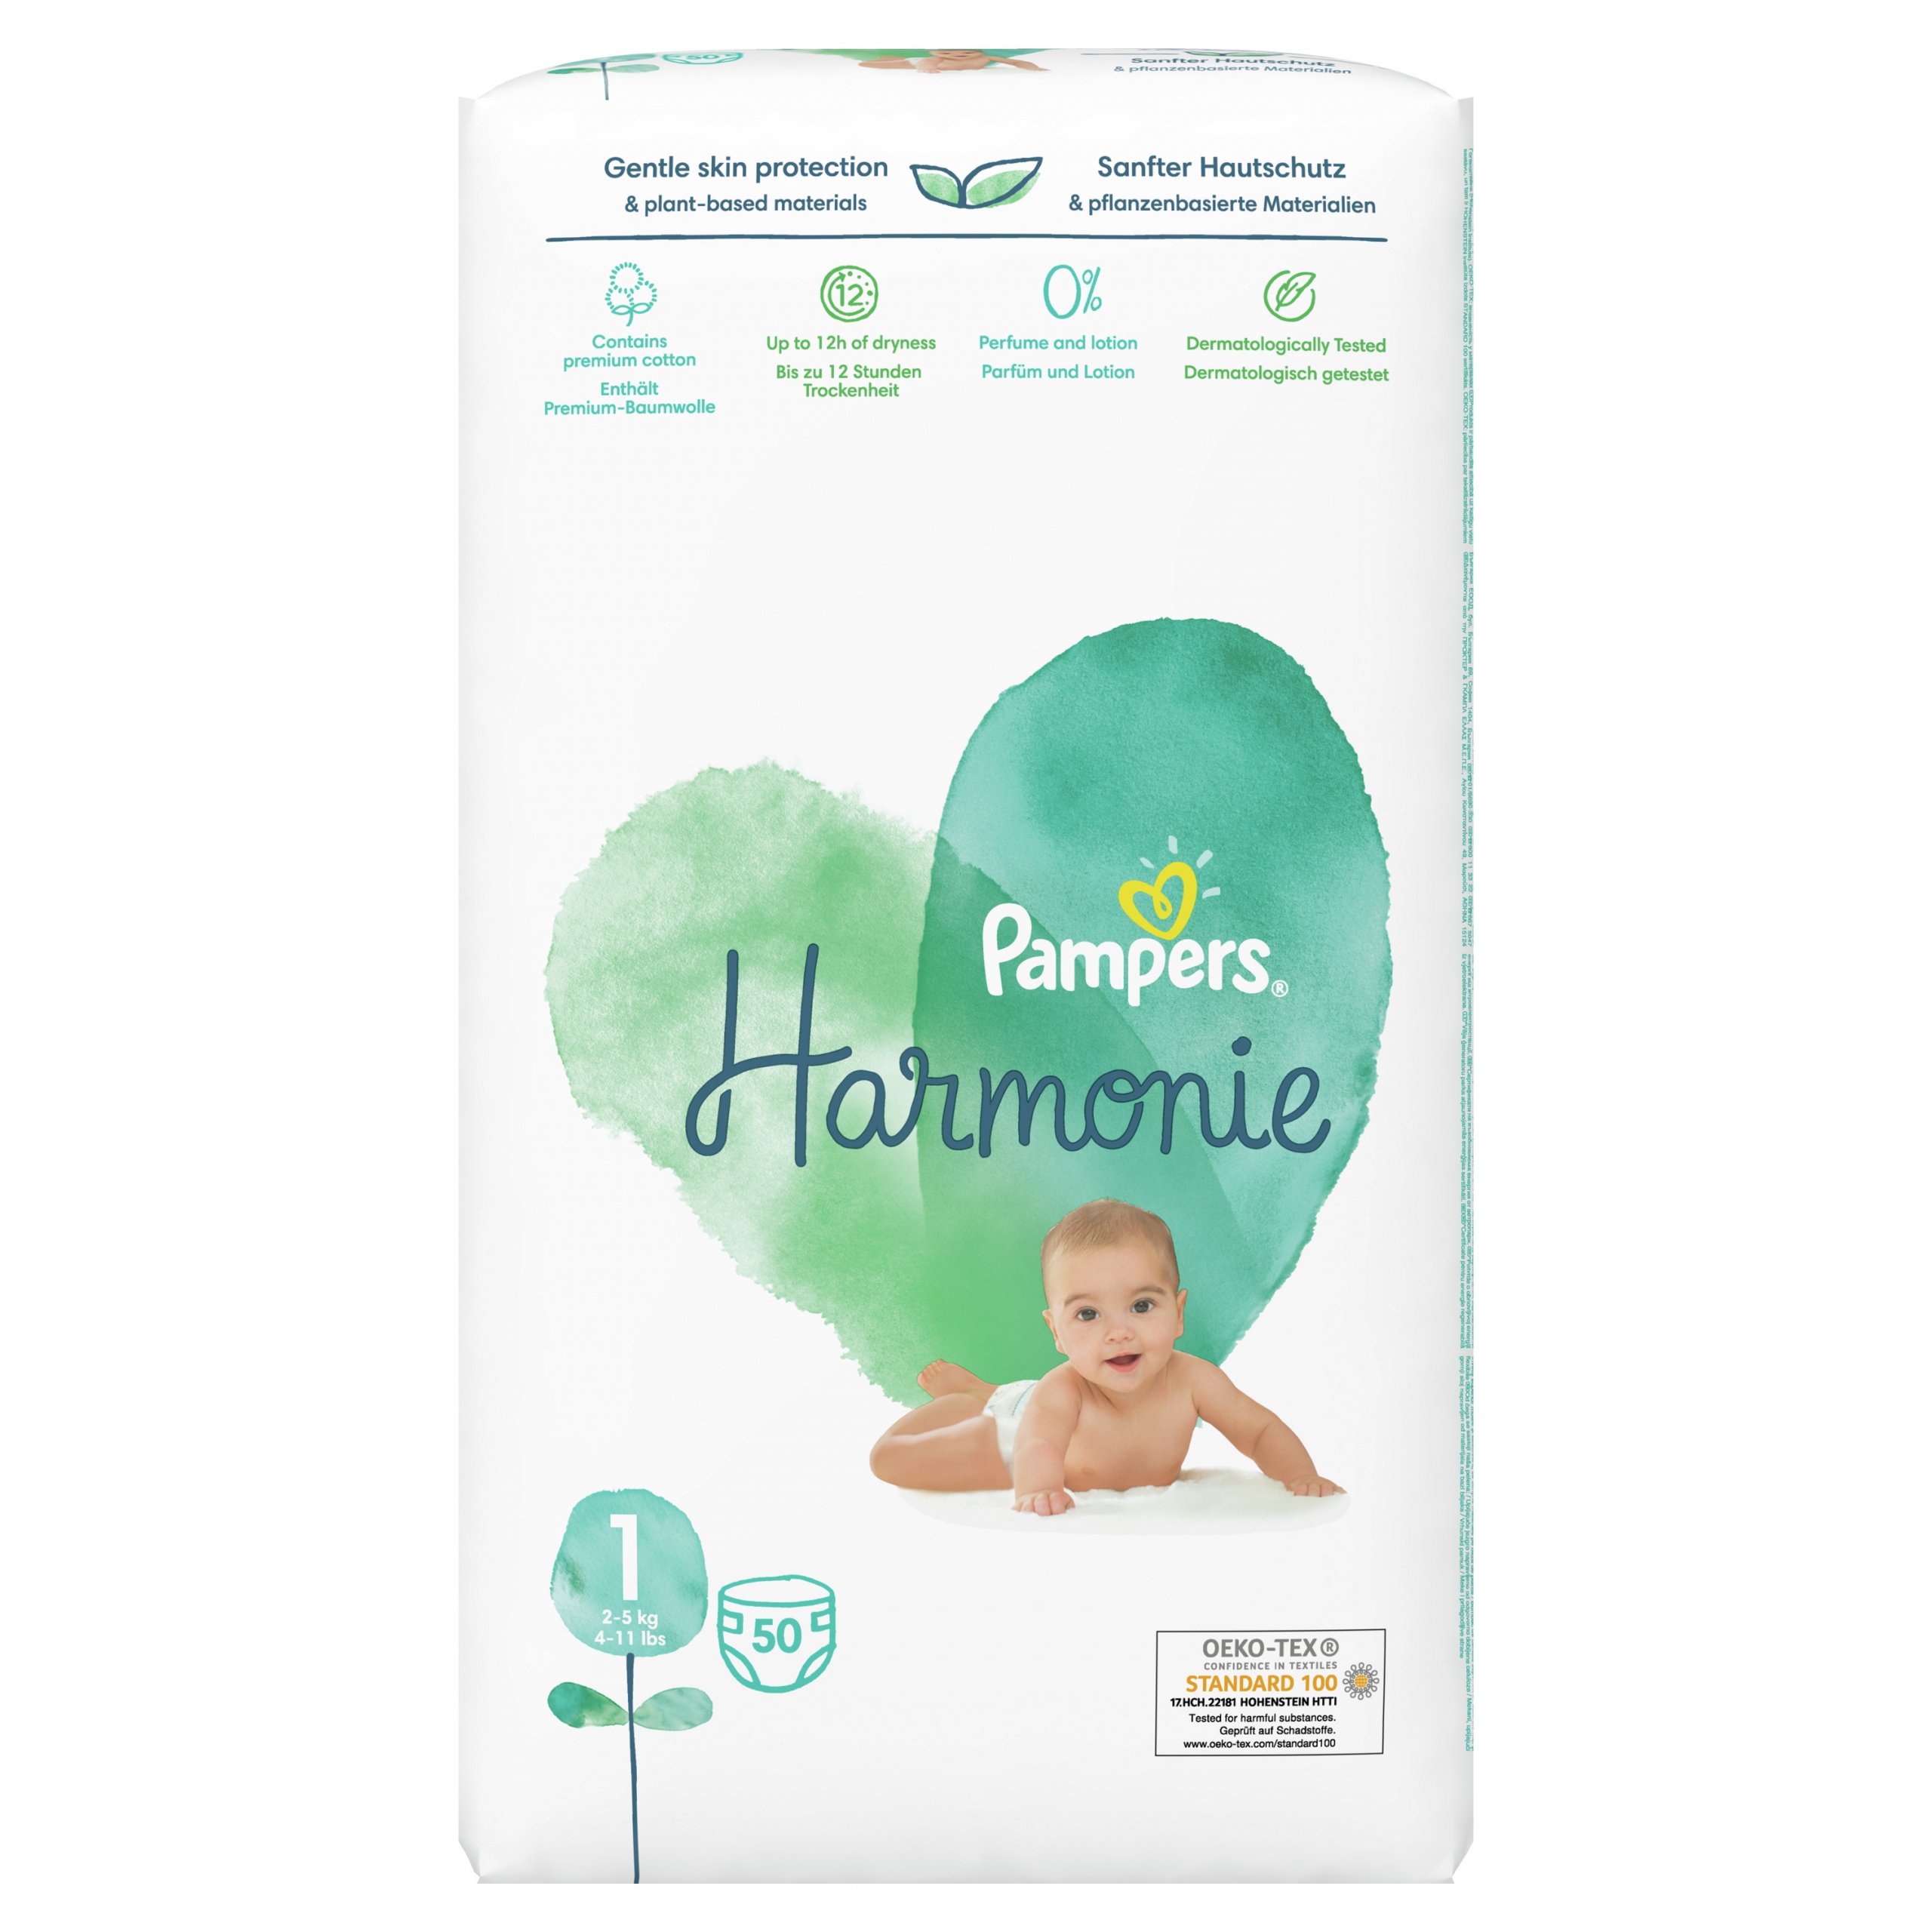 pampers 50 szt